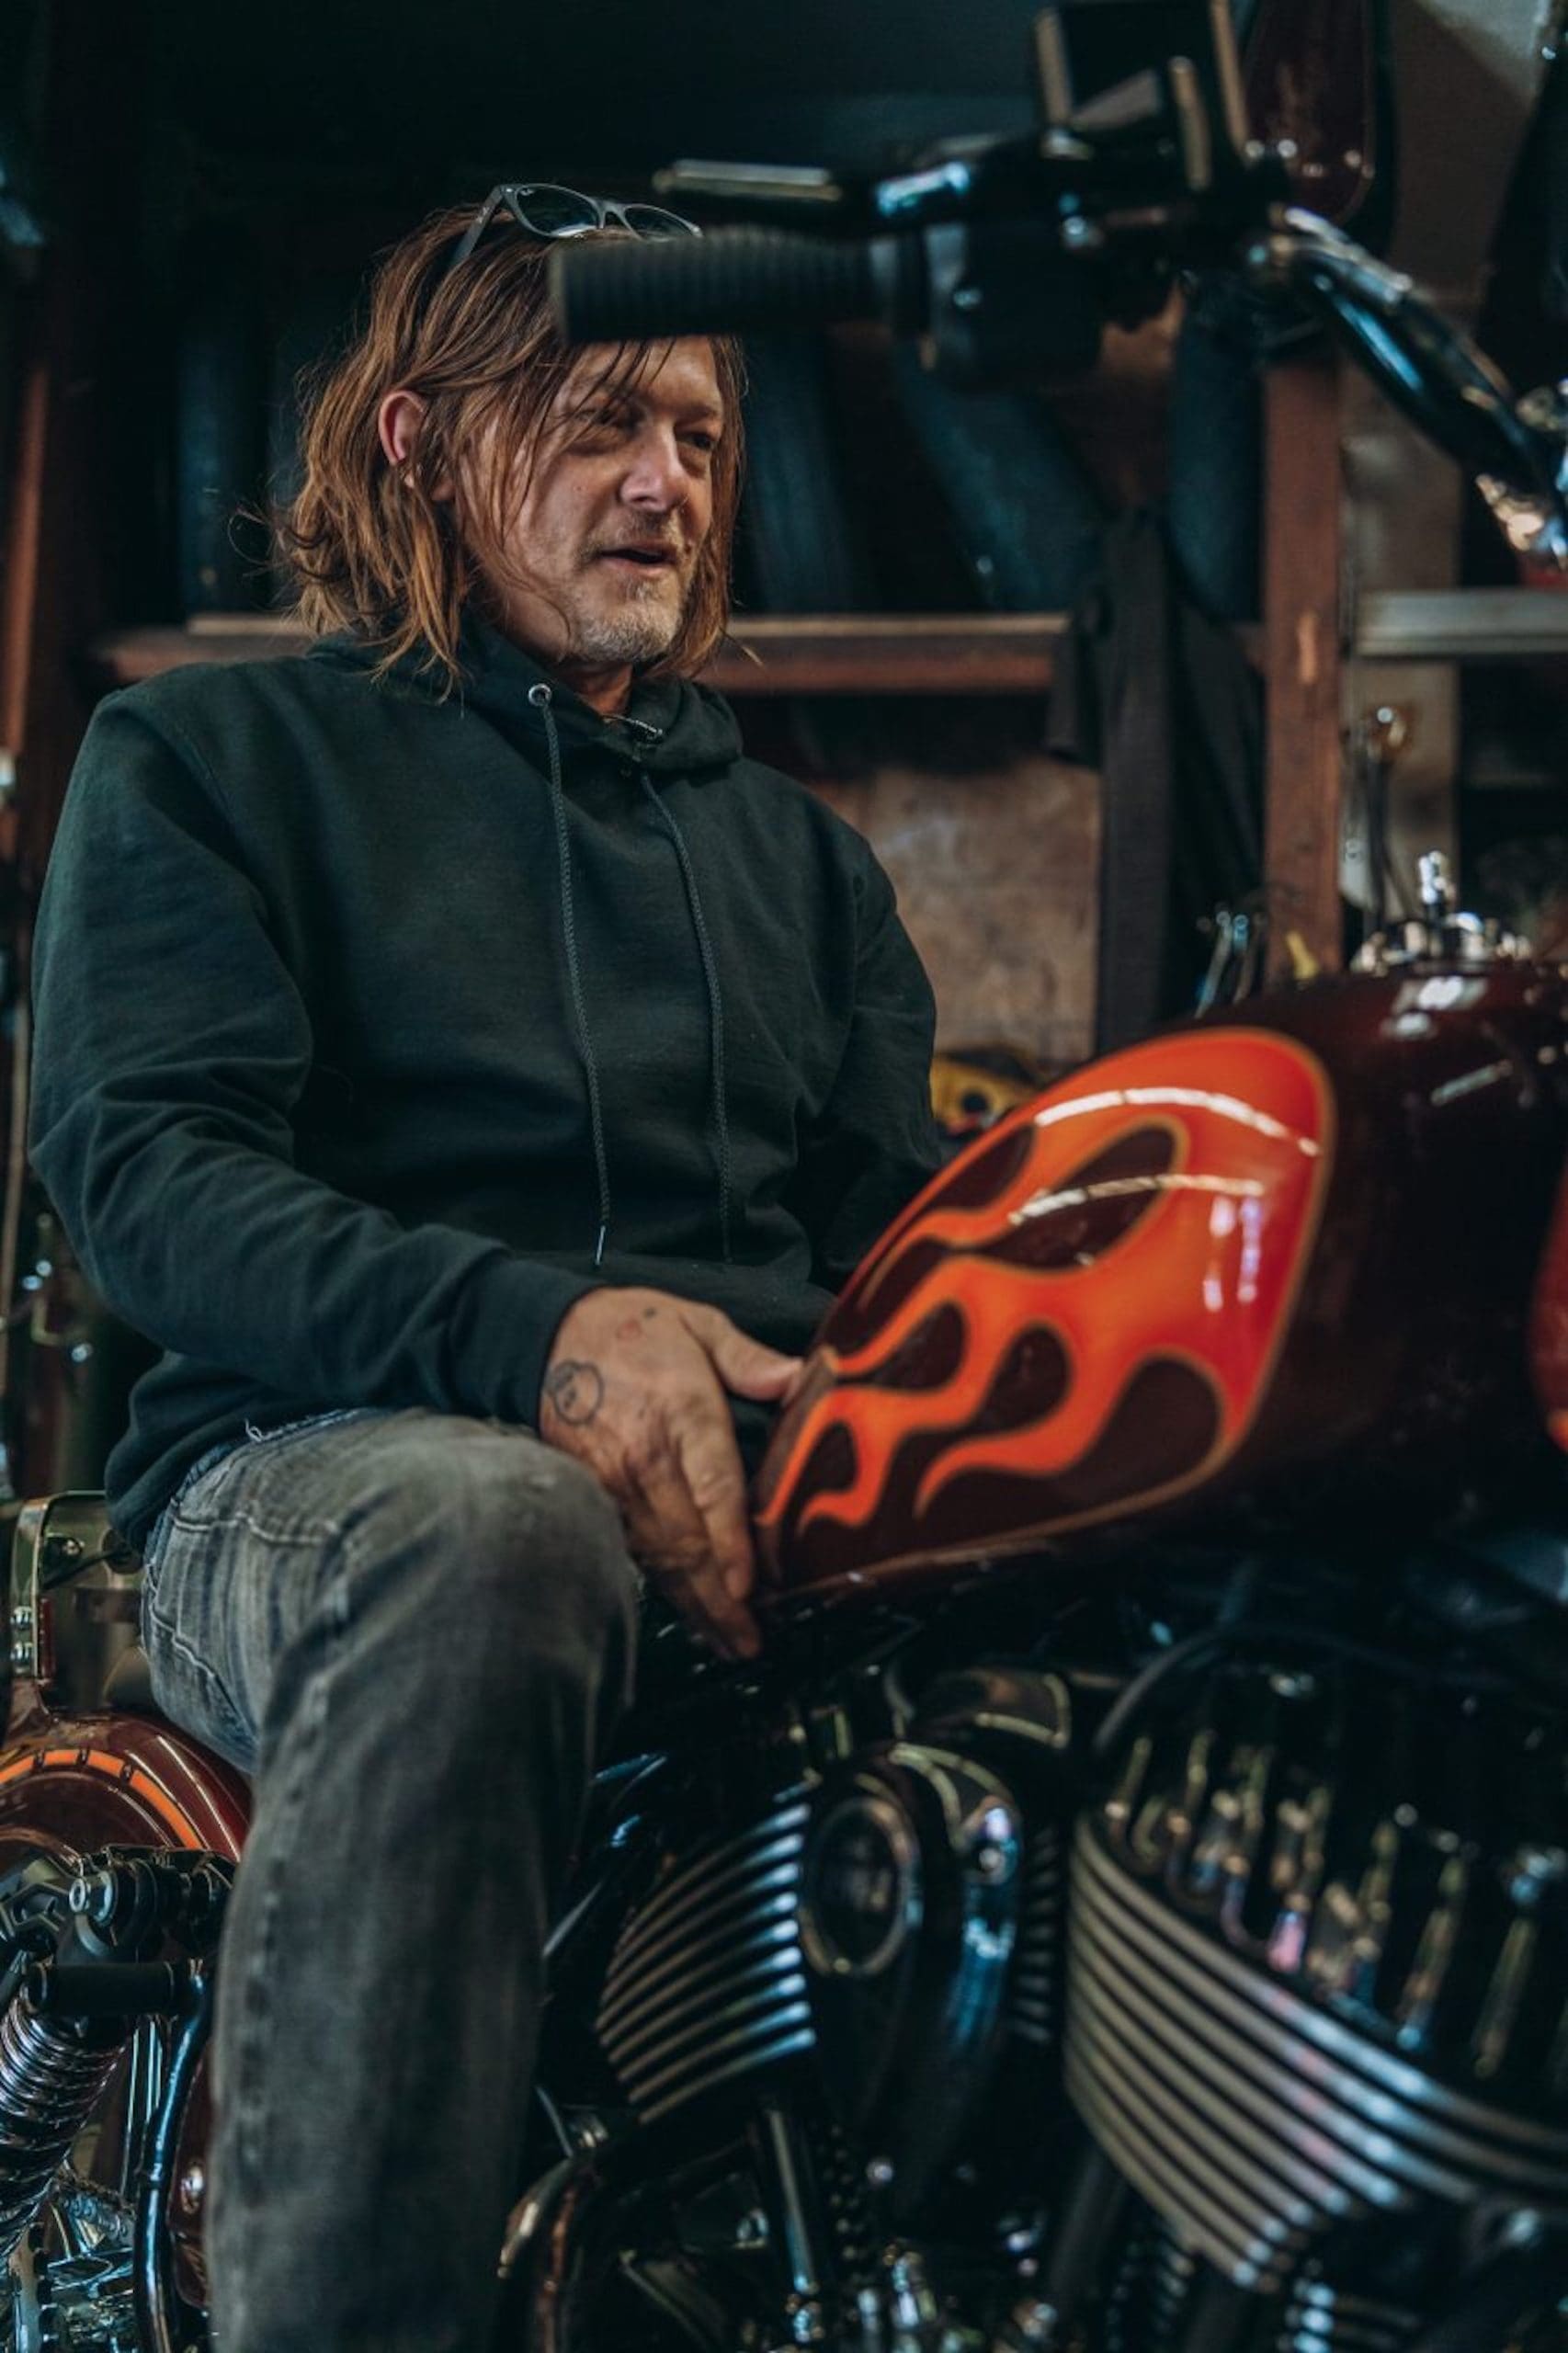 “Walking Dead” actor Norman Reedus' new custom Sport Chief from Indian's Forged series. Media sourced from Indian.